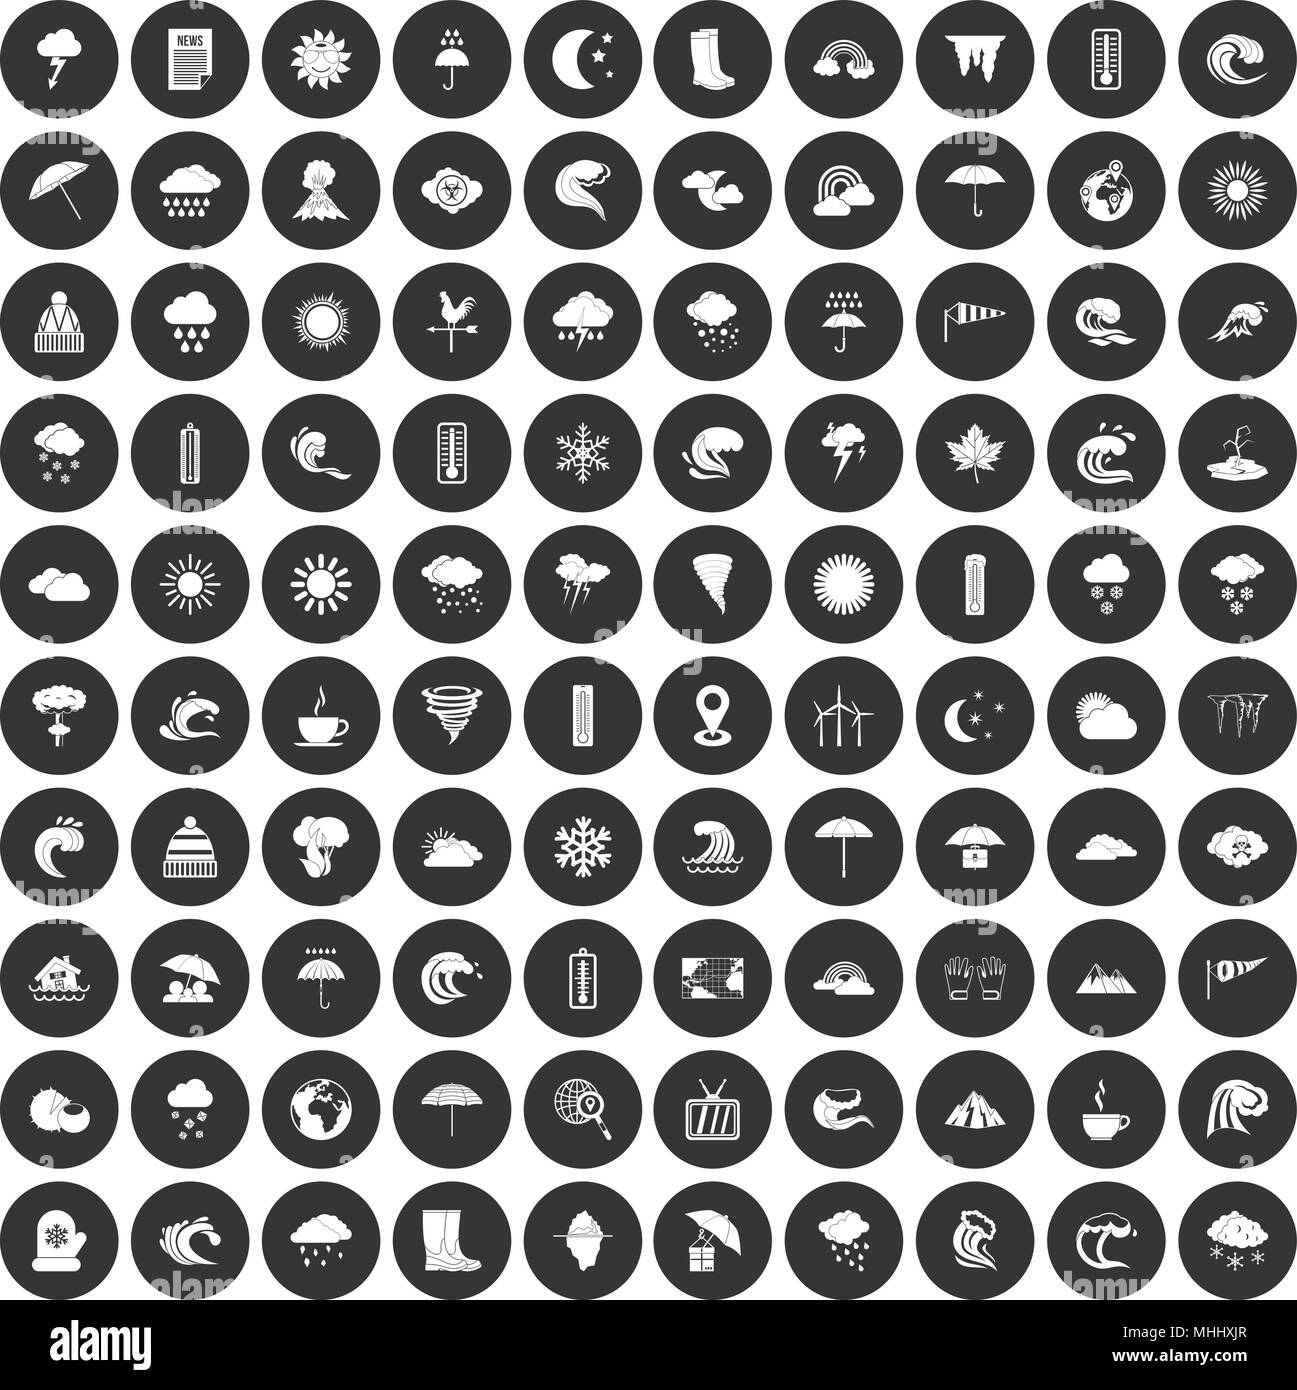 100 weather icons set black circle Stock Vector